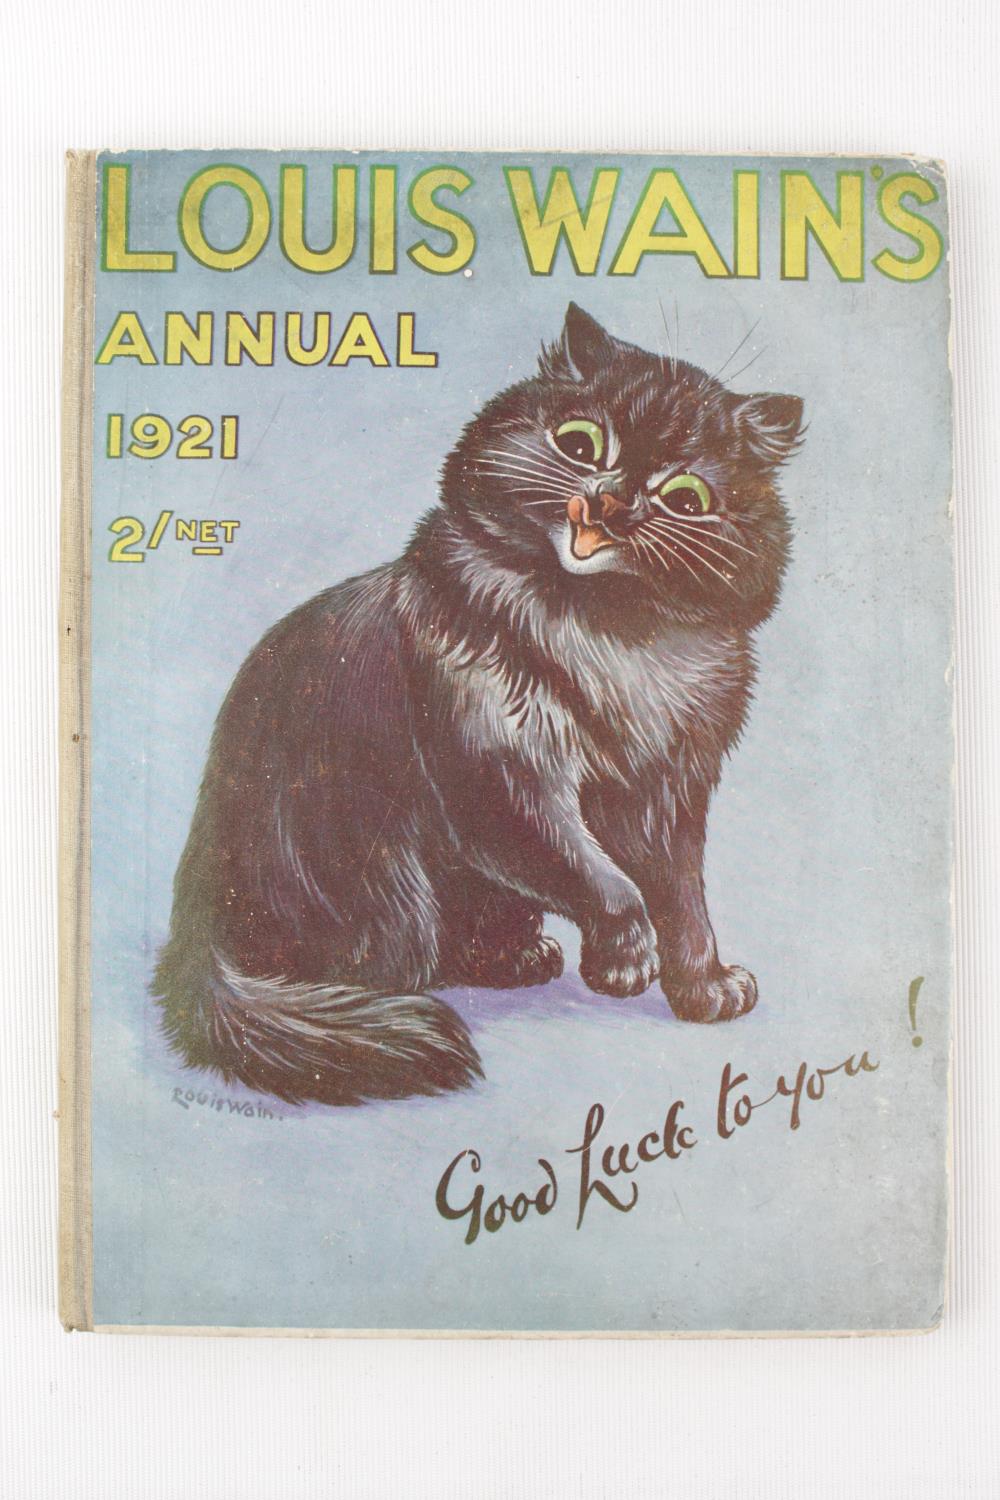 Louis Wain's Annual 1921 Signed by Luois Wain to preface page. Published by Hutchison & Co of